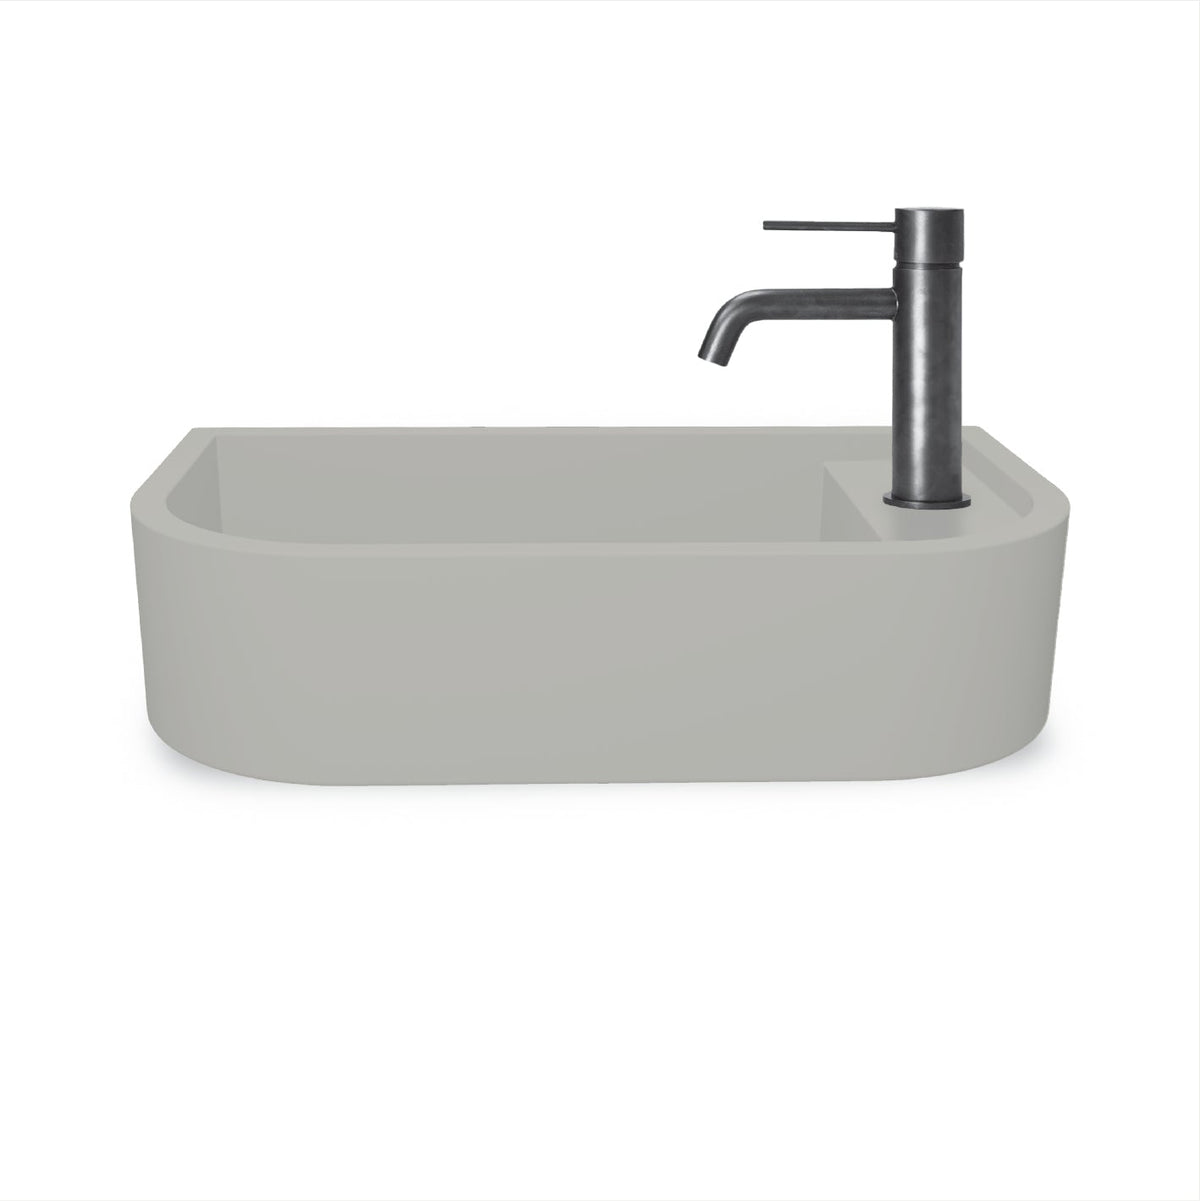 Loop 02 Basin - Overflow - Surface Mount (Ivory,Tap Hole,Chrome)